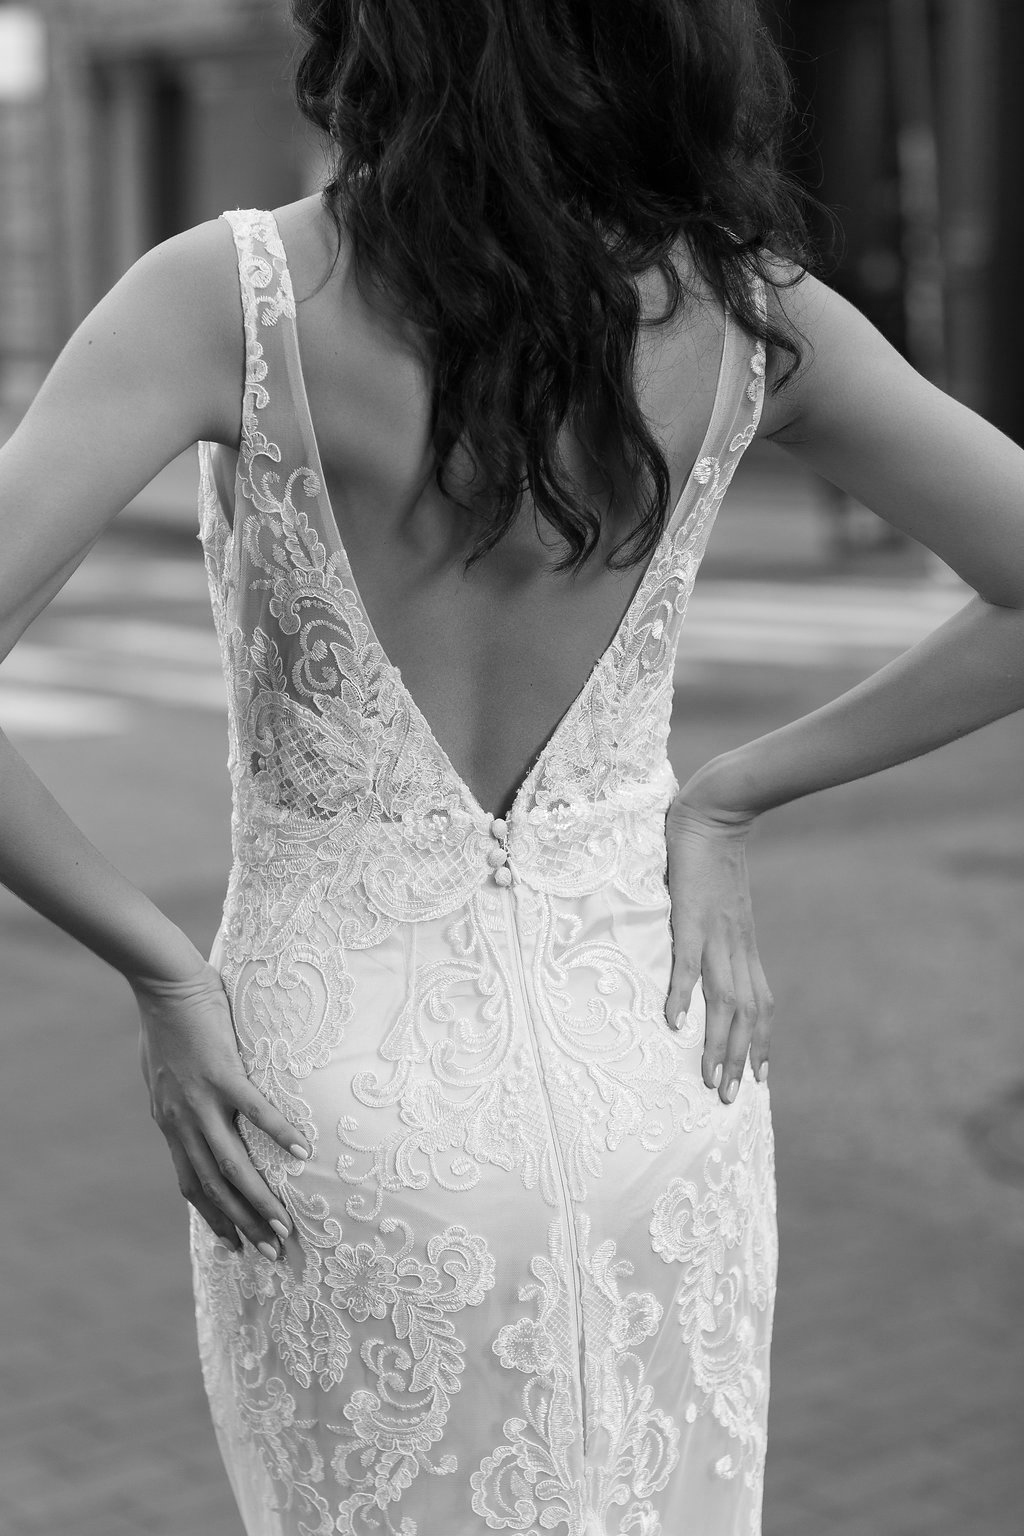 Anna+Campbell+at+The+Bridal+Atelier+Melbourne+Sydney+03.jpg